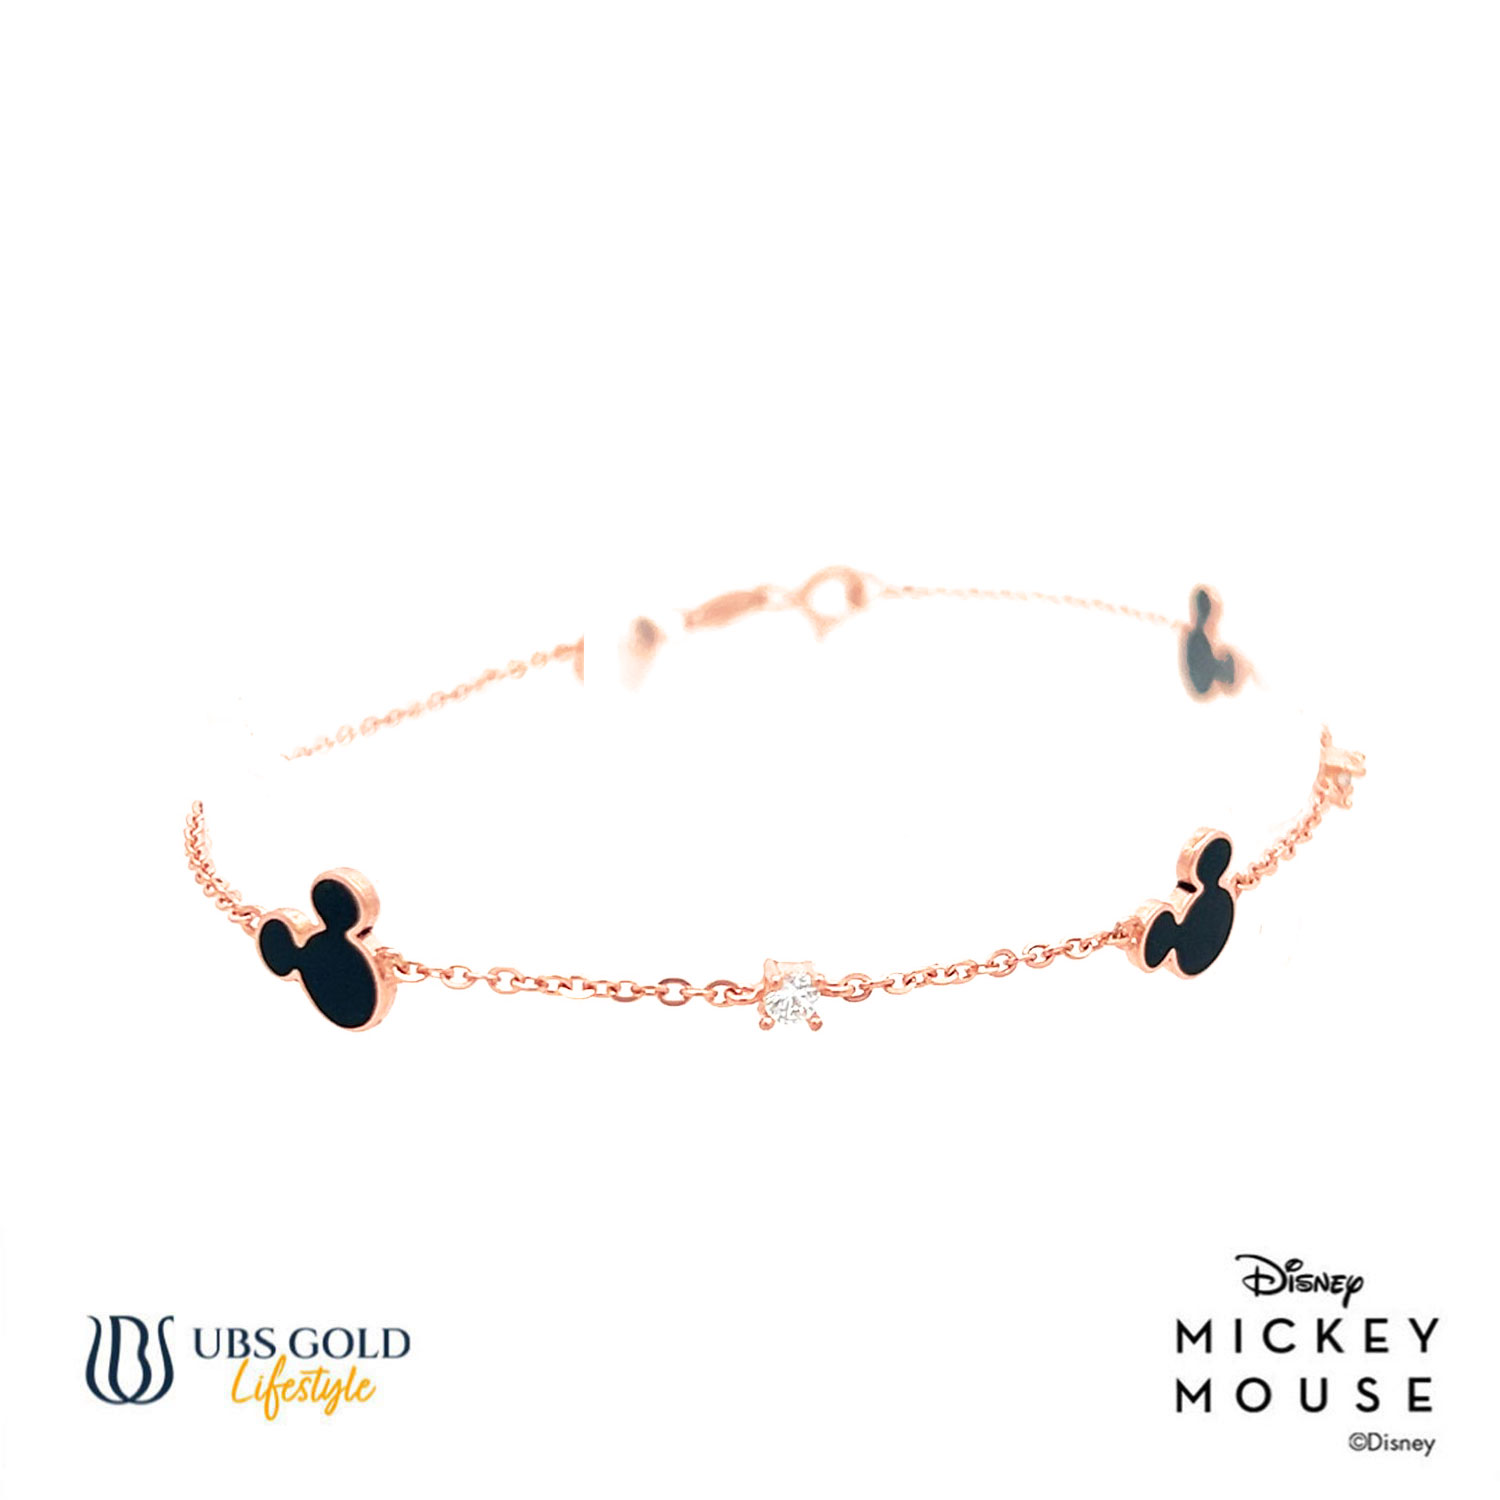 UBS Gold Gelang Emas Disney Mickey Mouse - Kgy0114 - 17K